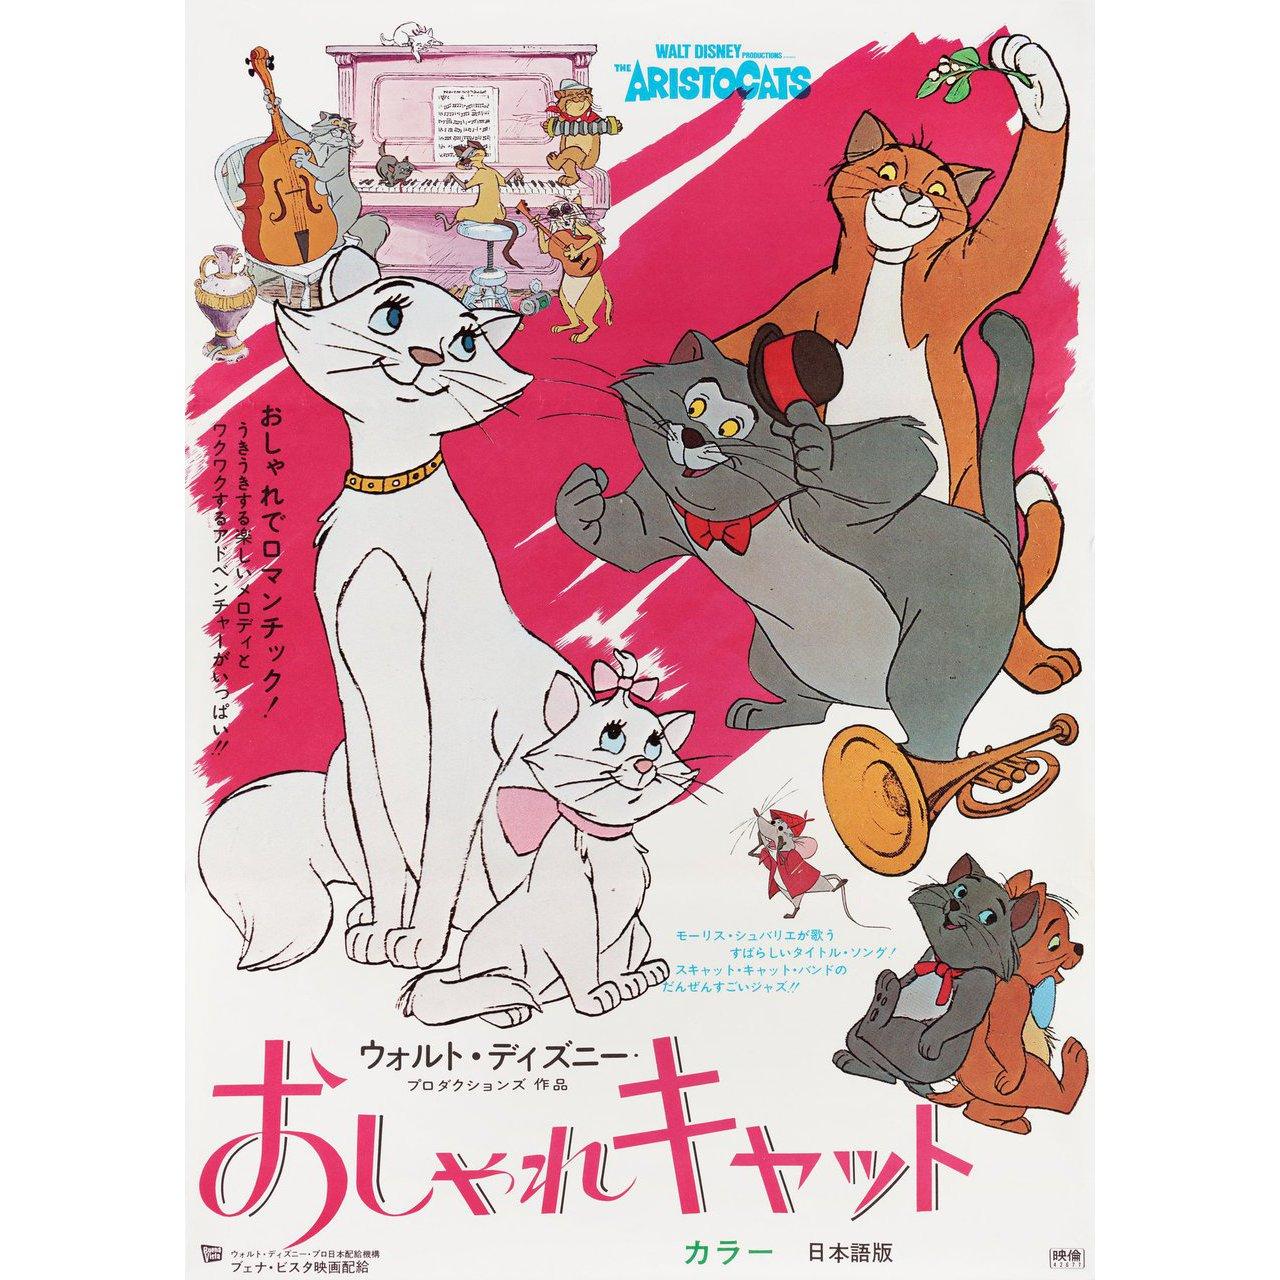 Original 1970 Japanese B2 poster for the film The AristoCats directed by Wolfgang Reitherman with Phil Harris / Eva Gabor / Sterling Holloway / Scatman Crothers. Very Good-Fine condition, rolled. Please note: the size is stated in inches and the